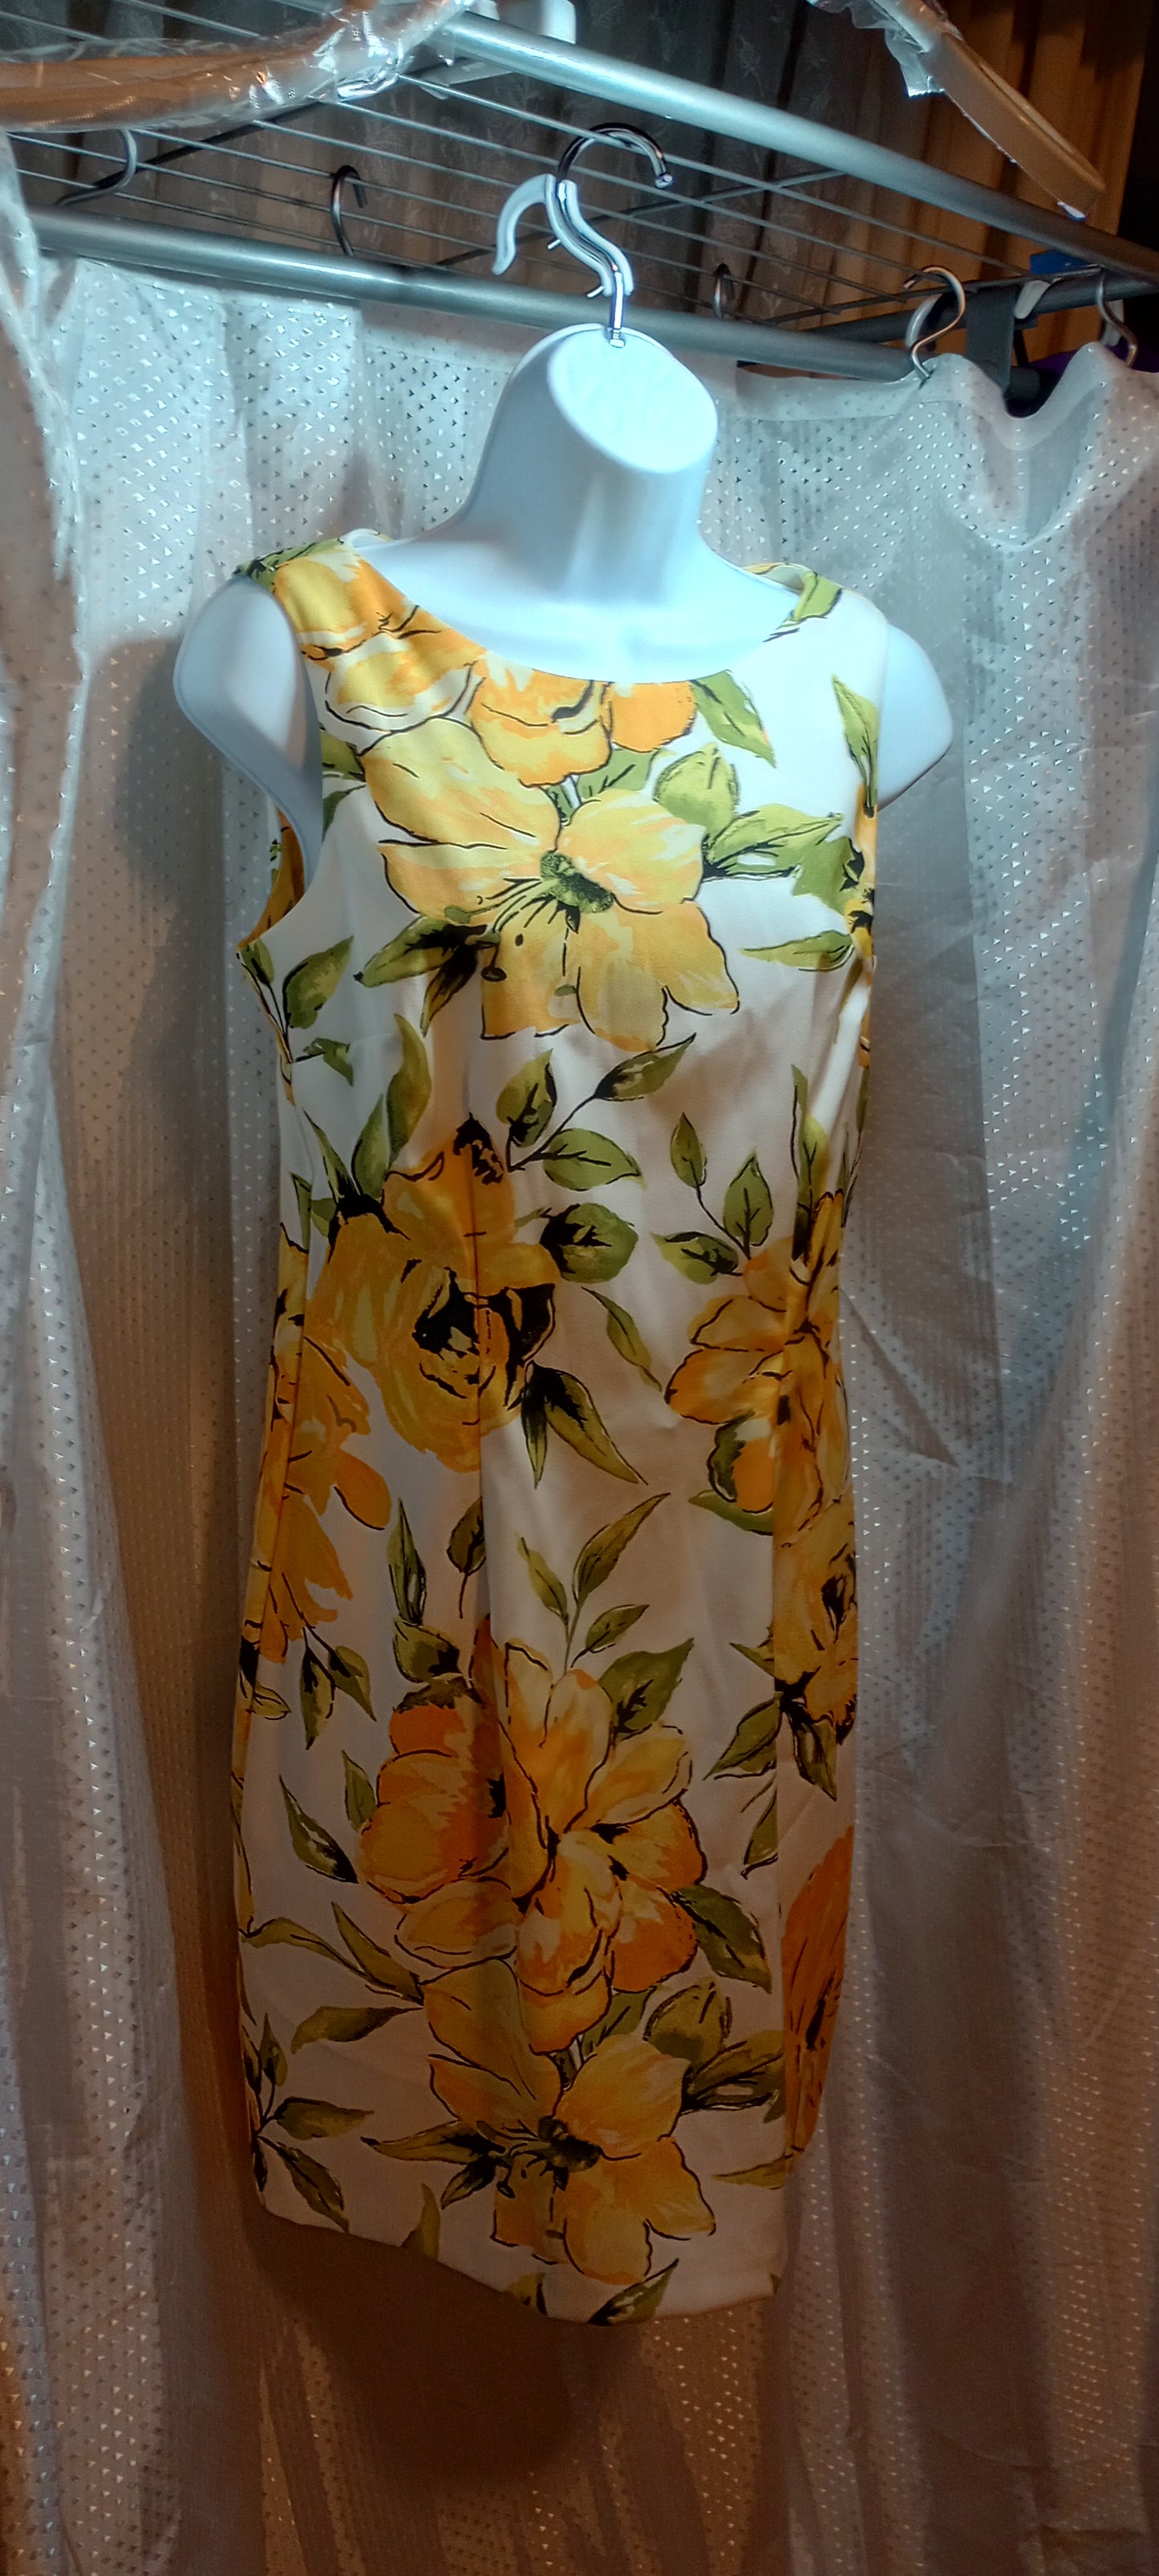 Kim Rogers Dress Floral Sleeveless Yellow Green Flower Tropical Knee Midi Summer Size: 6 Stunning yellow flowers on this sleeveless floral dress. Step out in style this Spring and Summer.